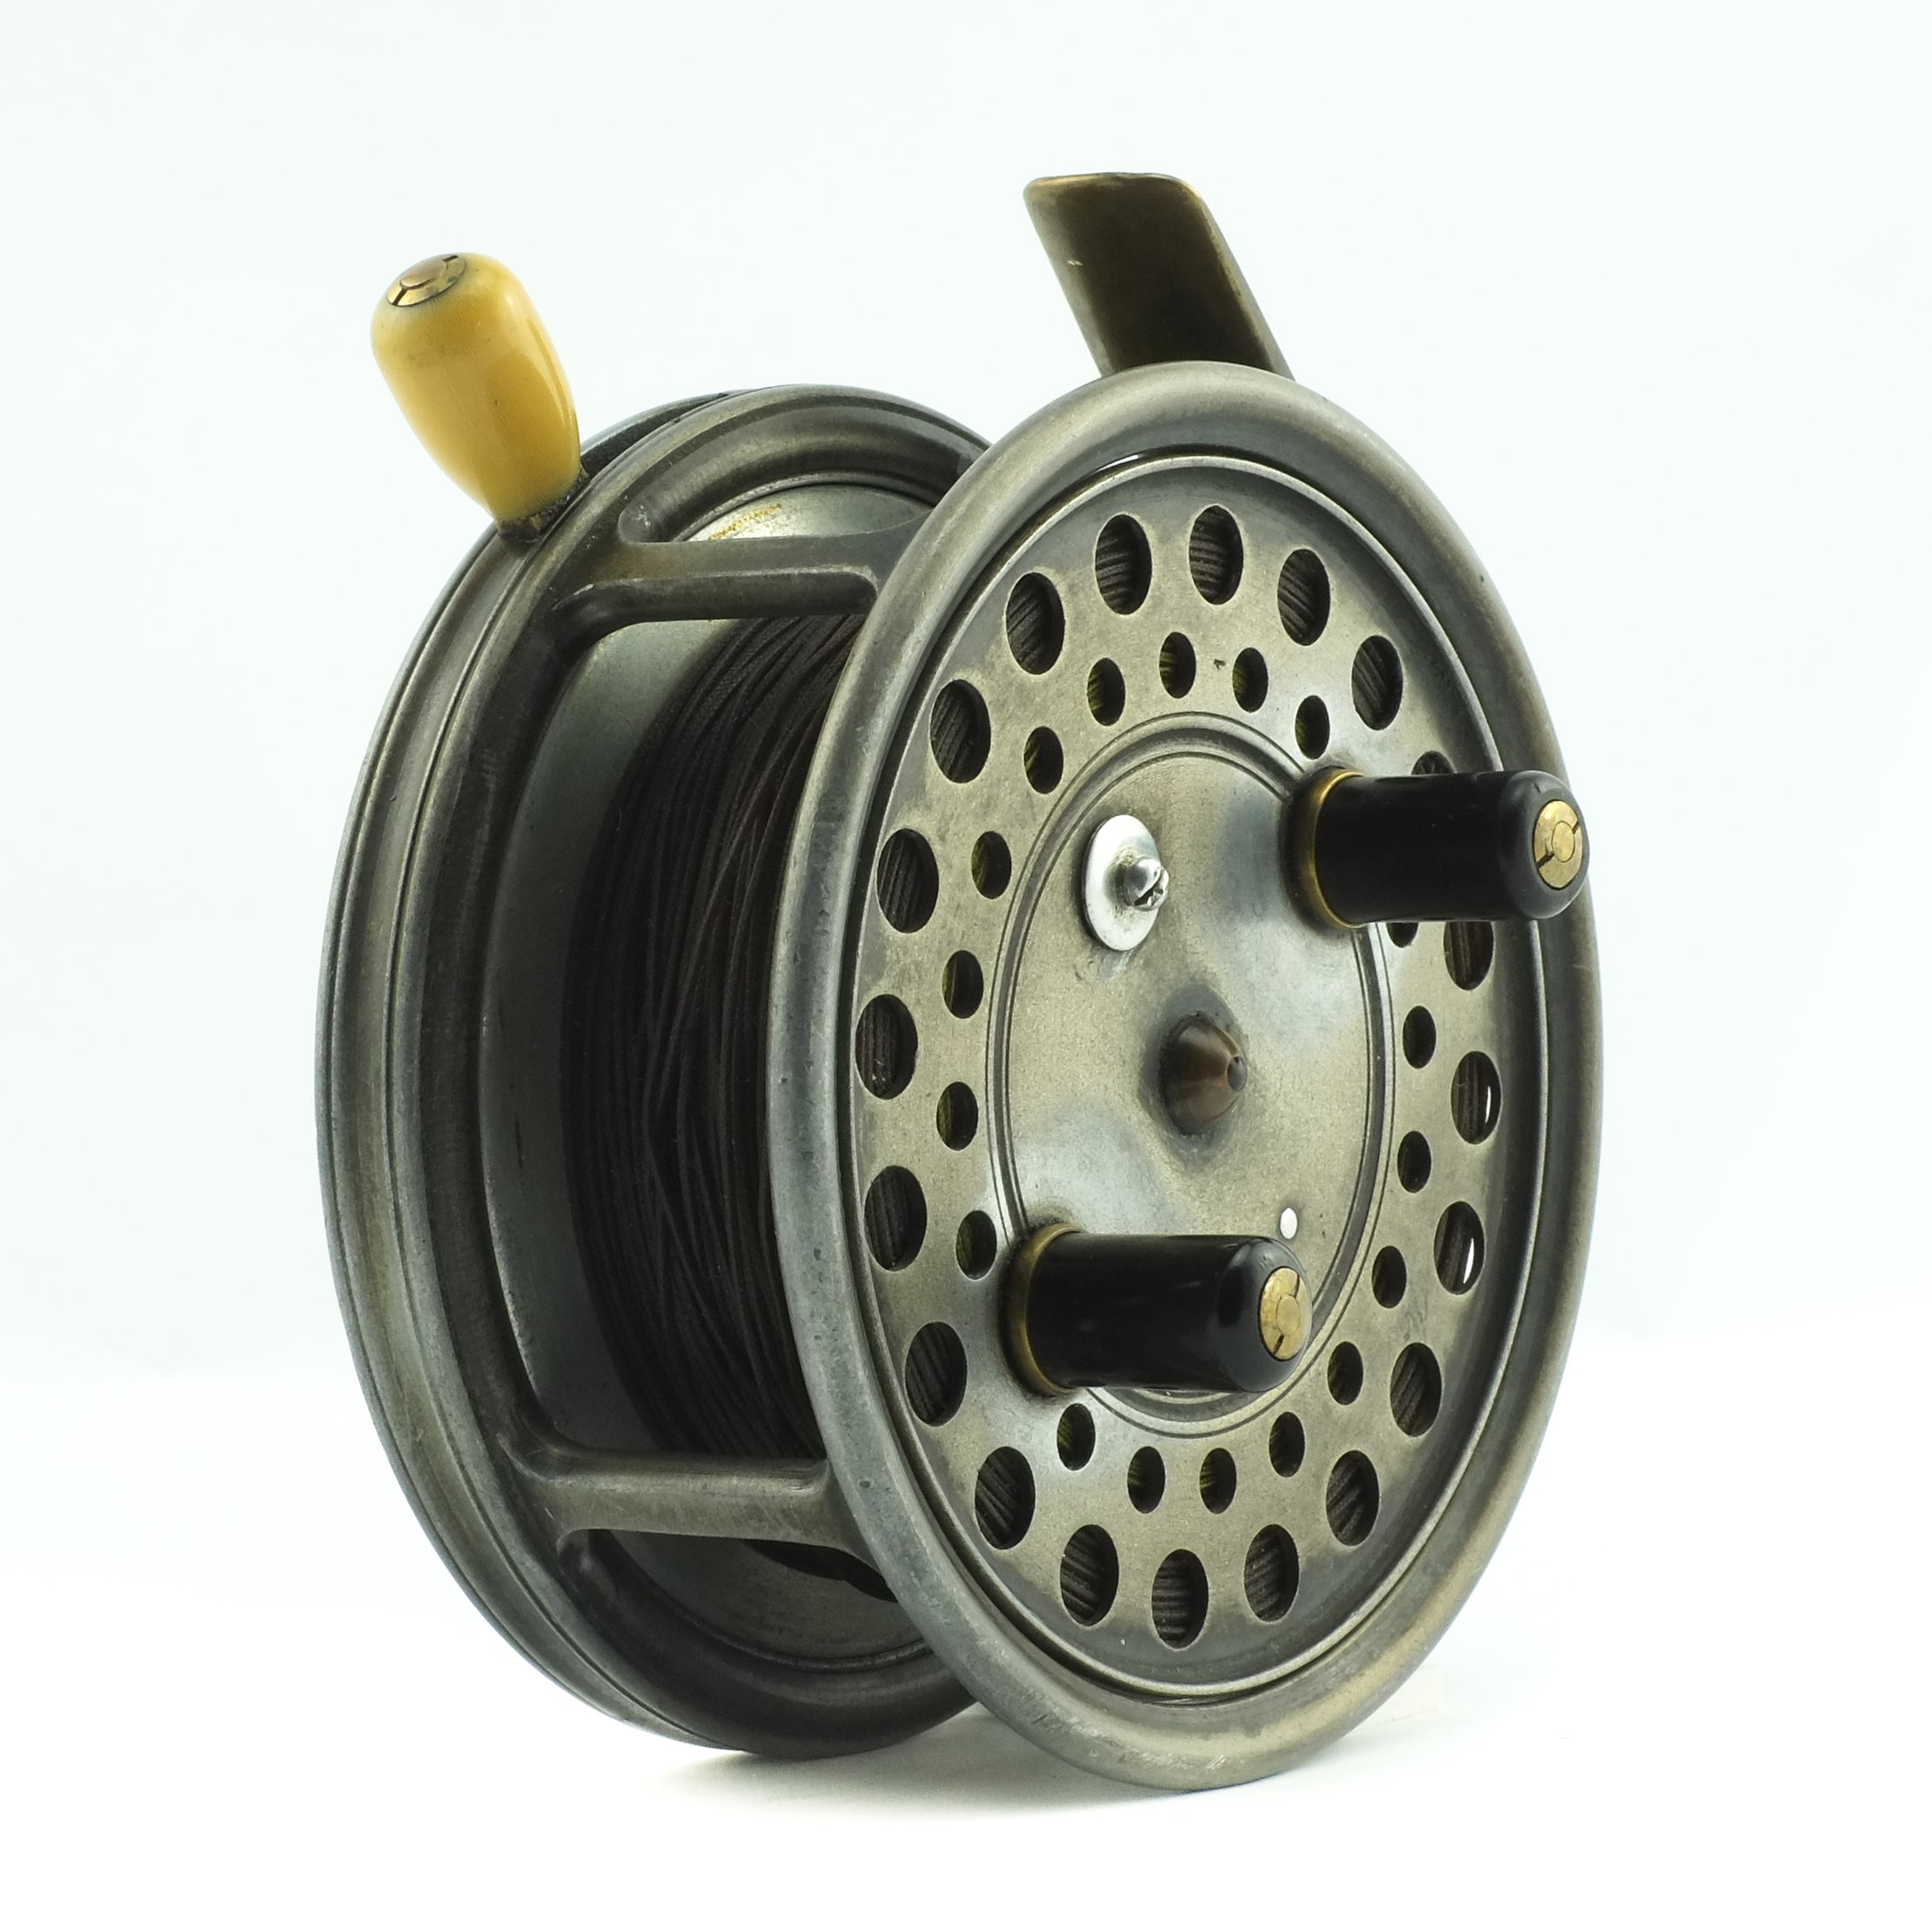 Lot 55 - A Hardy Silex Major 3 Spinning Reel